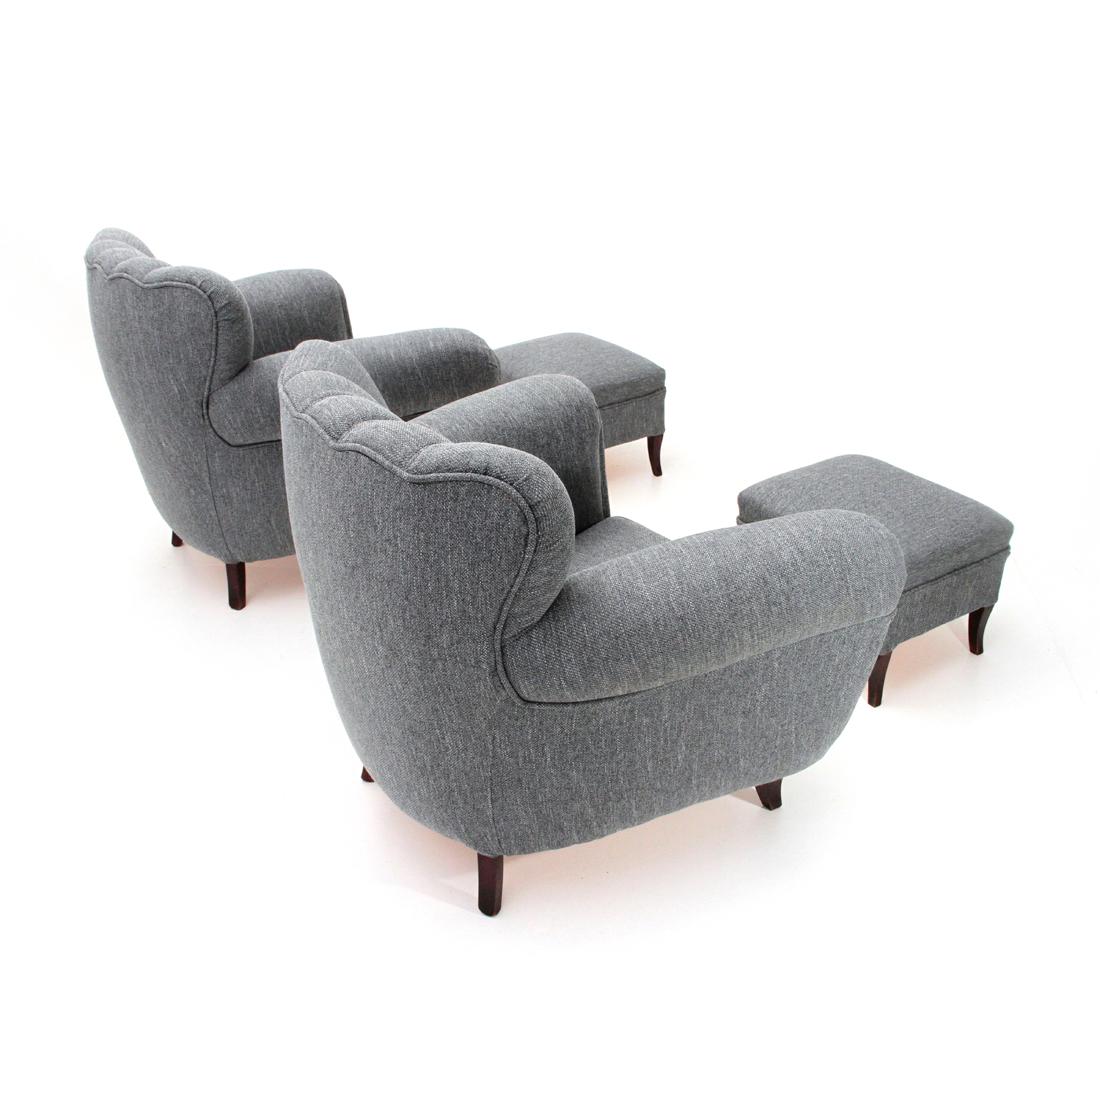 Fabric Italian Midcentury Gray Armchair with Pouf, 1950s, Set of 2